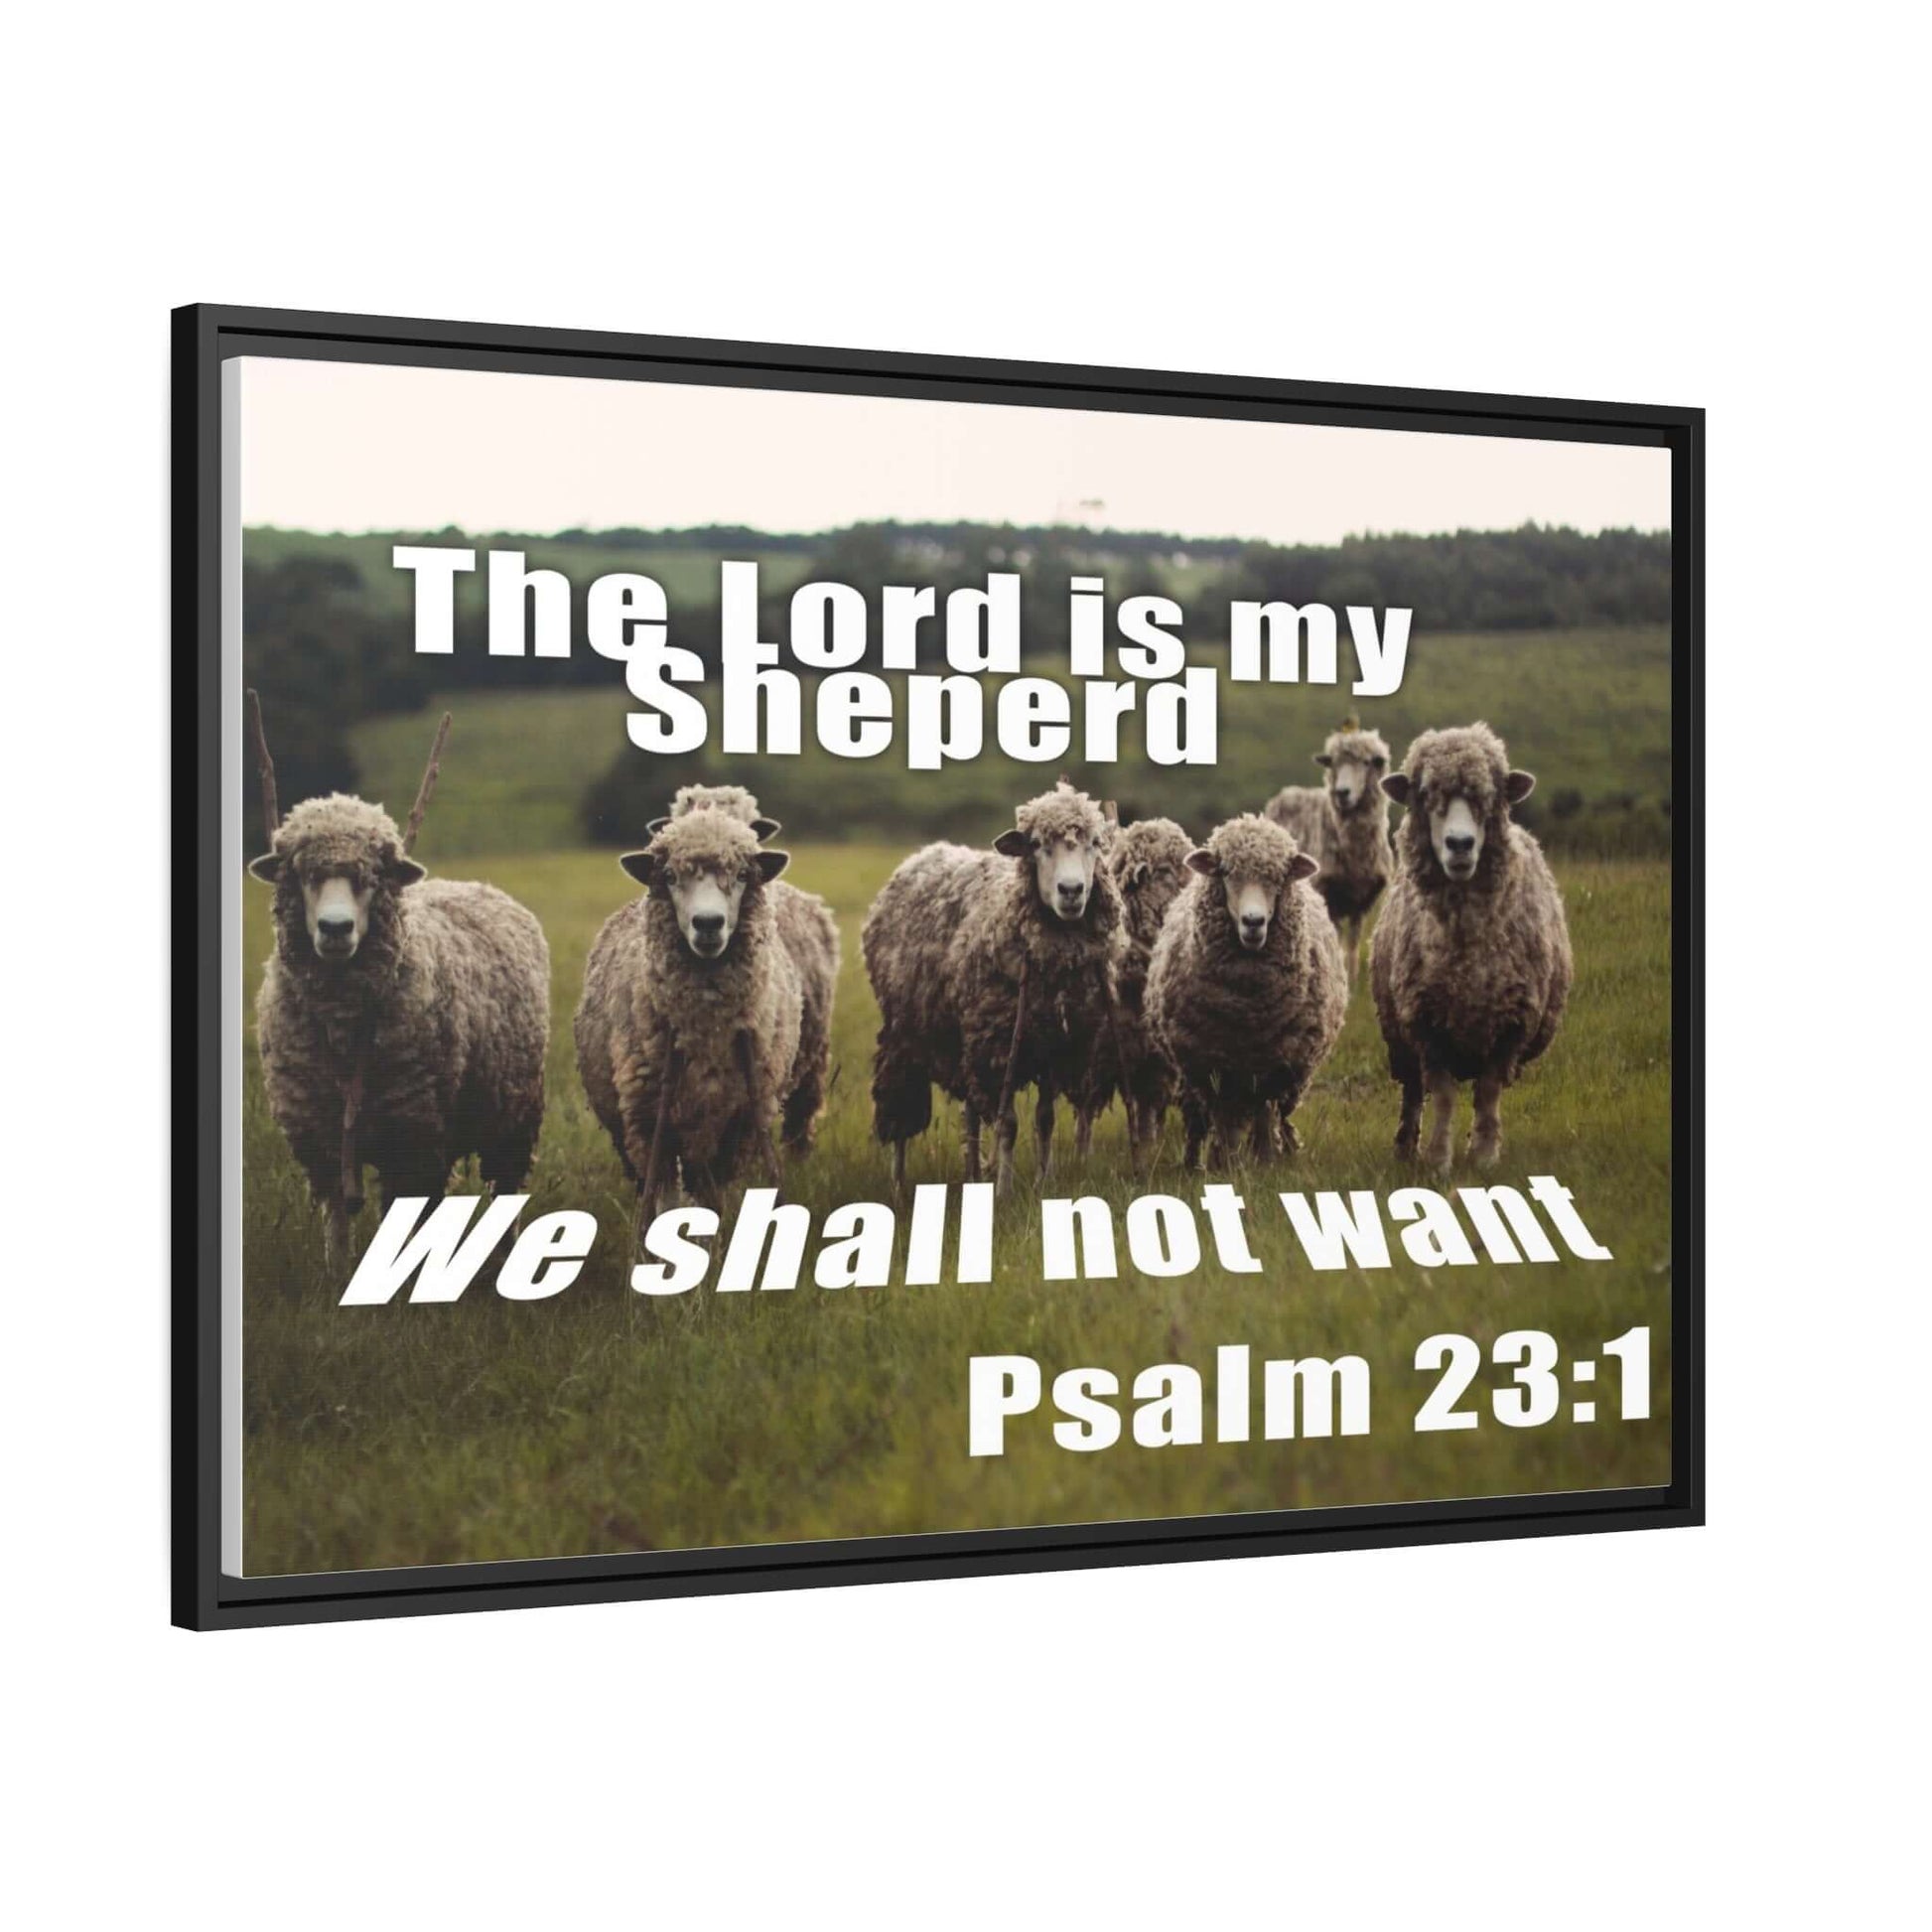 Elegant Canvas Painting with Frame - Psalm 23:1 | Art & Wall Decor,Canvas,Decor,Eco-friendly,Framed,Hanging Hardware,Home & Living,Summer Picks,Sustainable